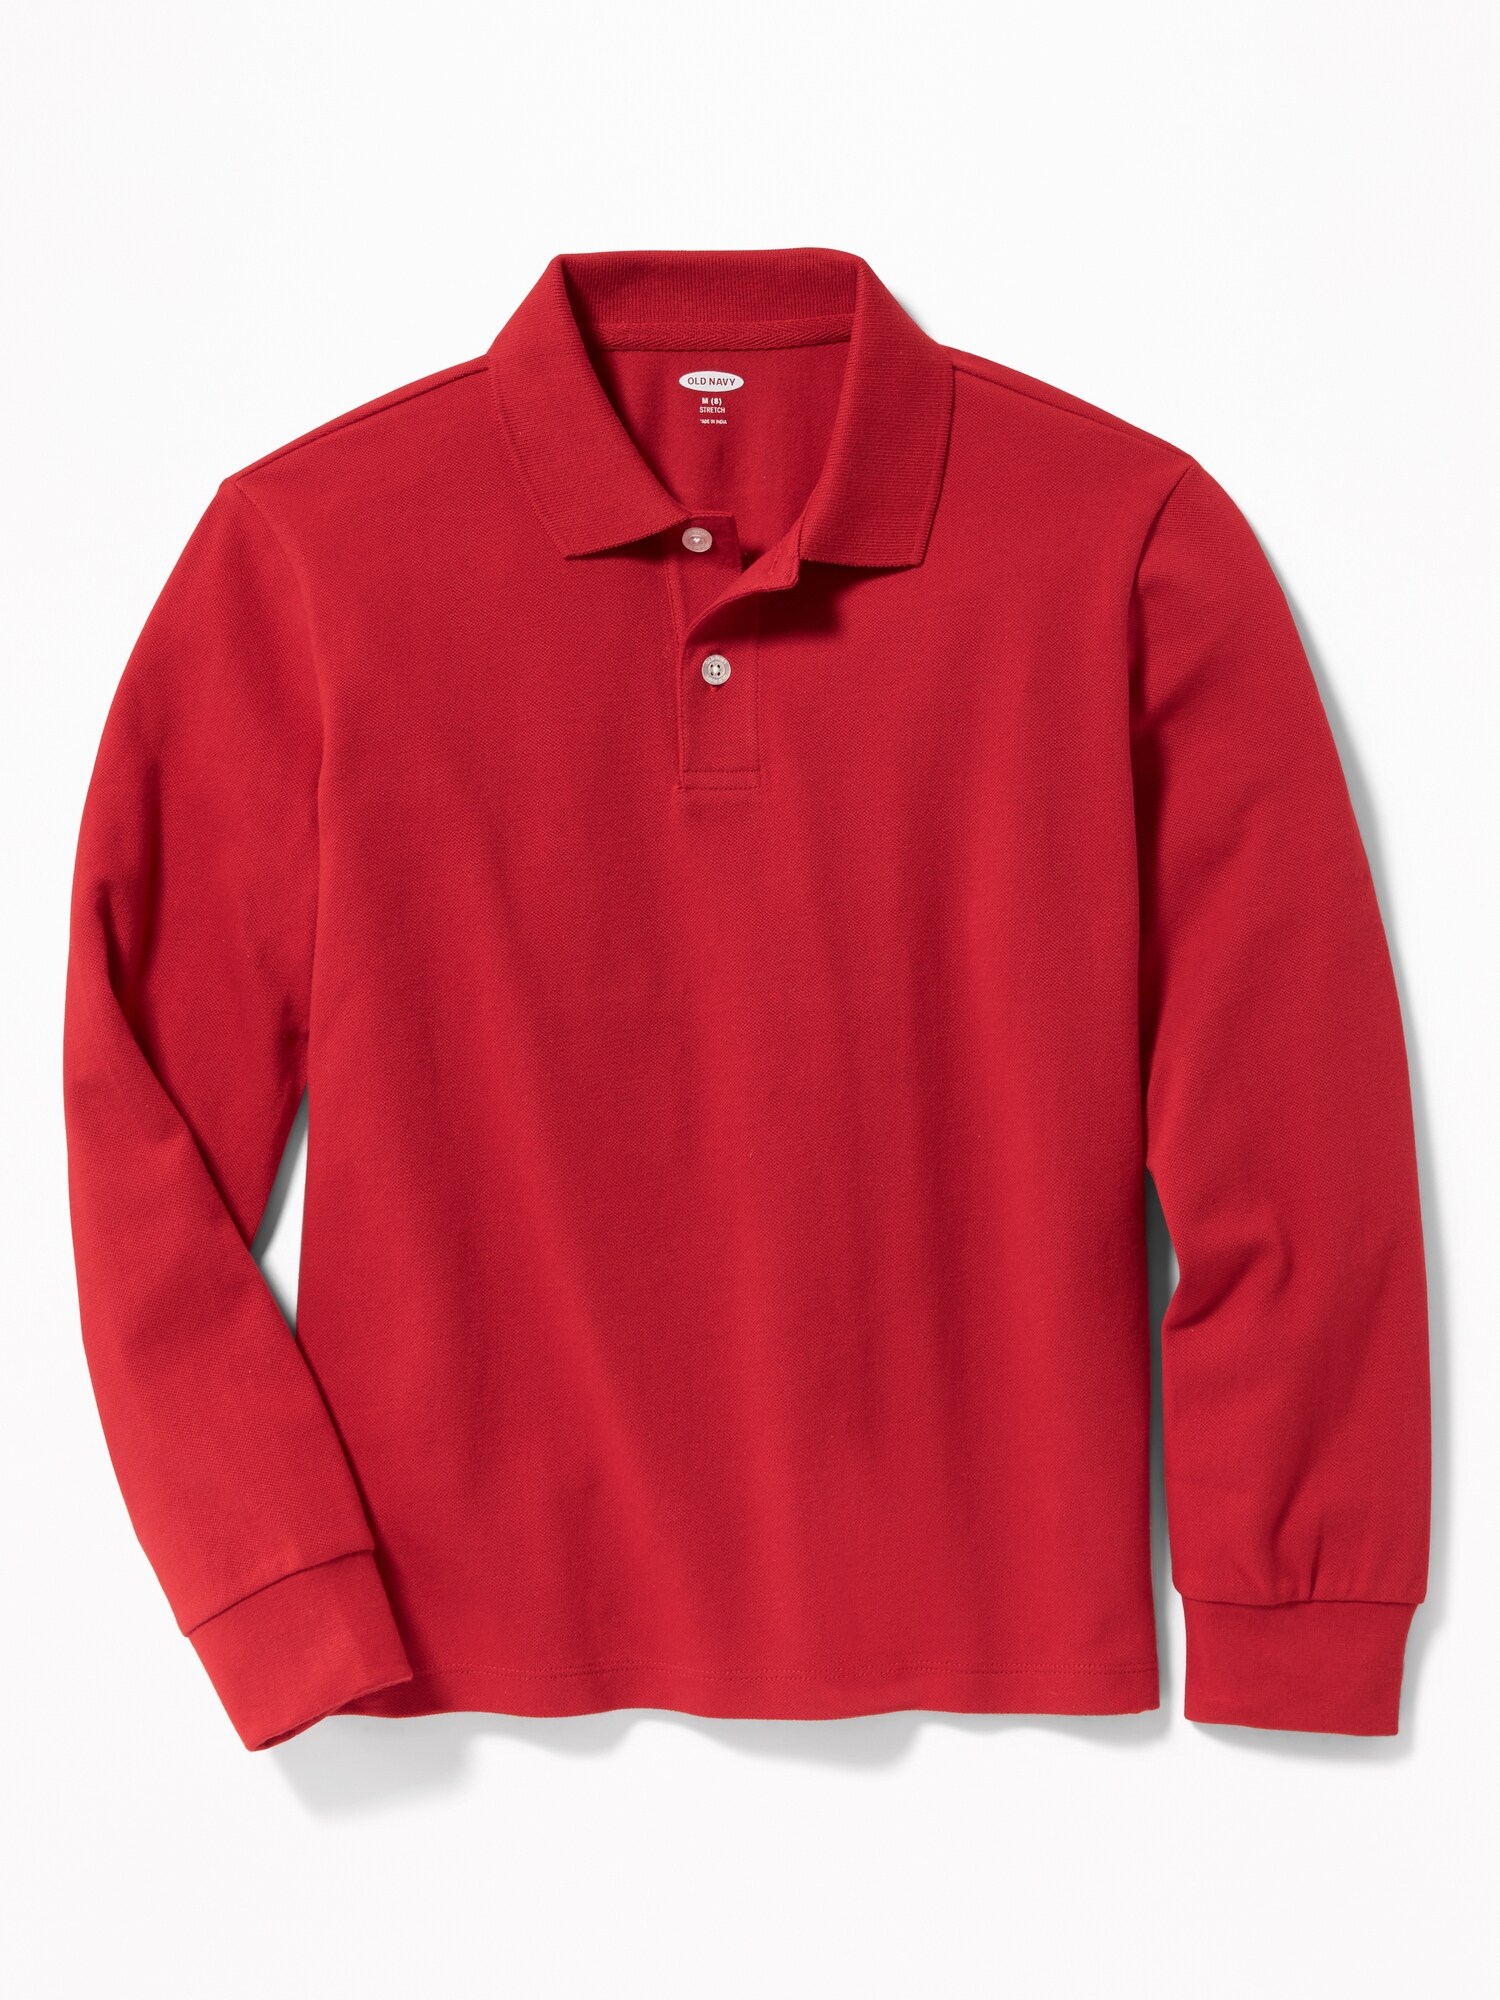 *Today Only Deal* Uniform Built-In Flex Long-Sleeve Pique Polo for Boys